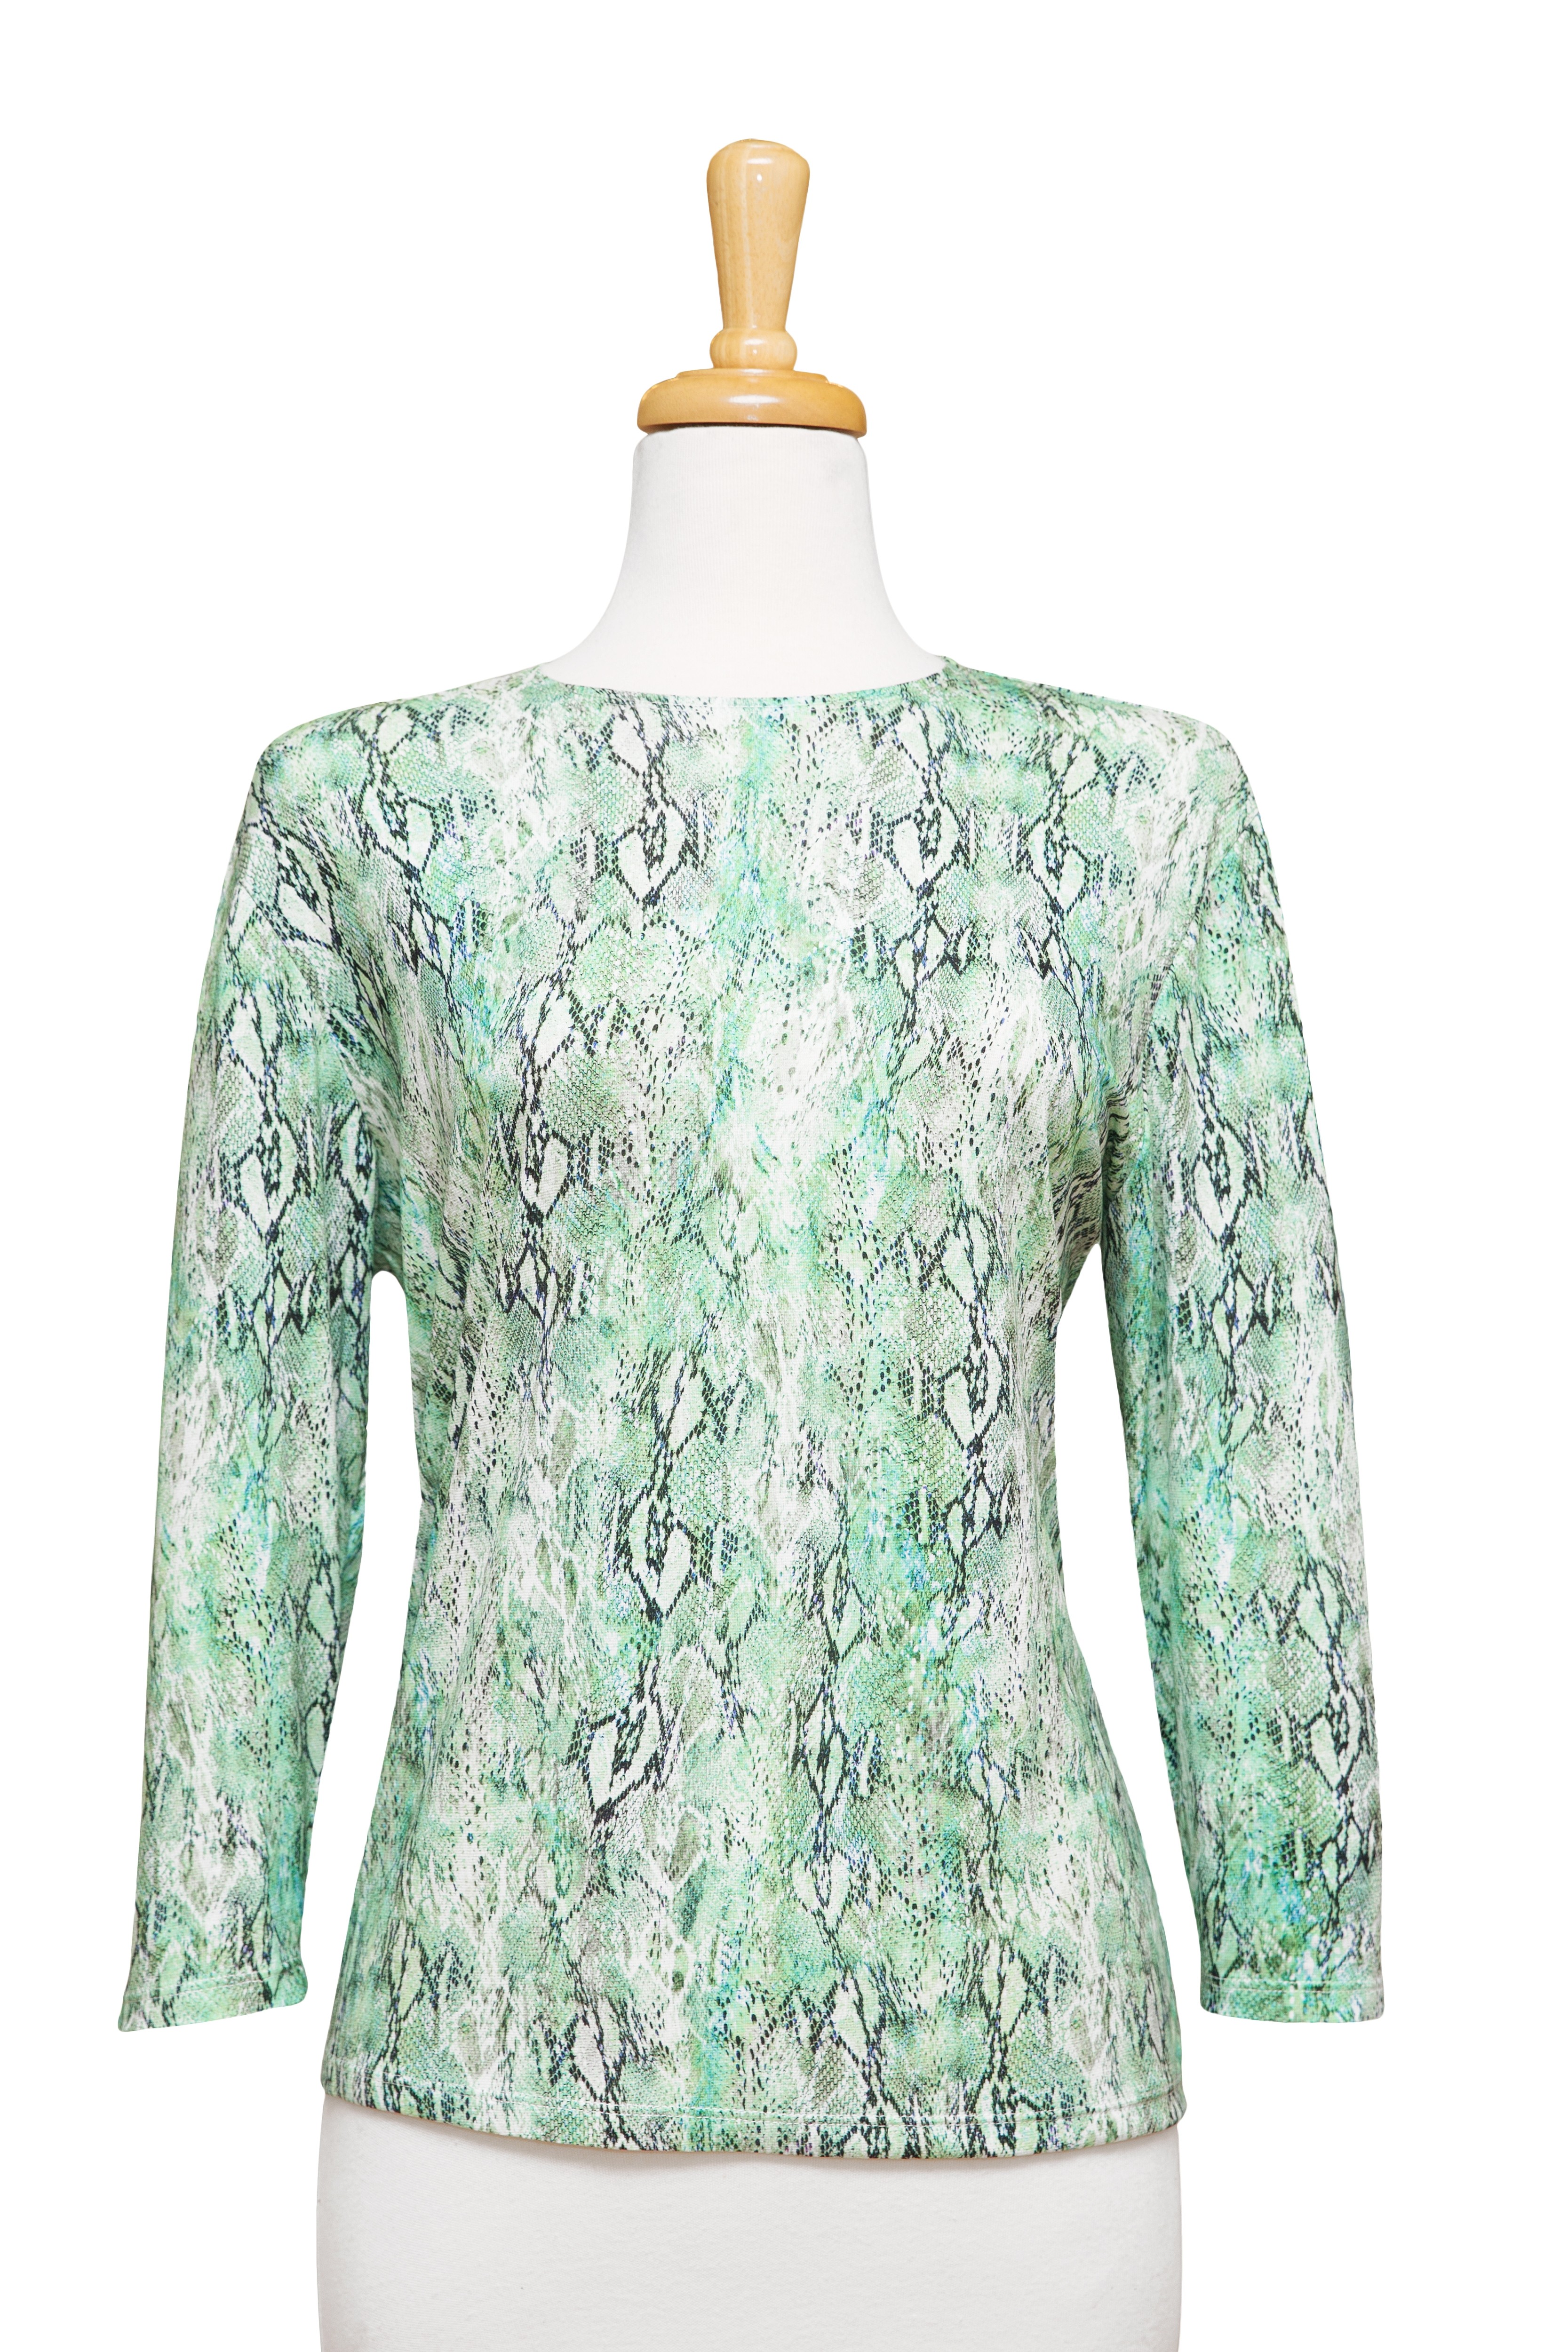 Mint and Black Snakeskin 3/4 Sleeve  Cotton Top 